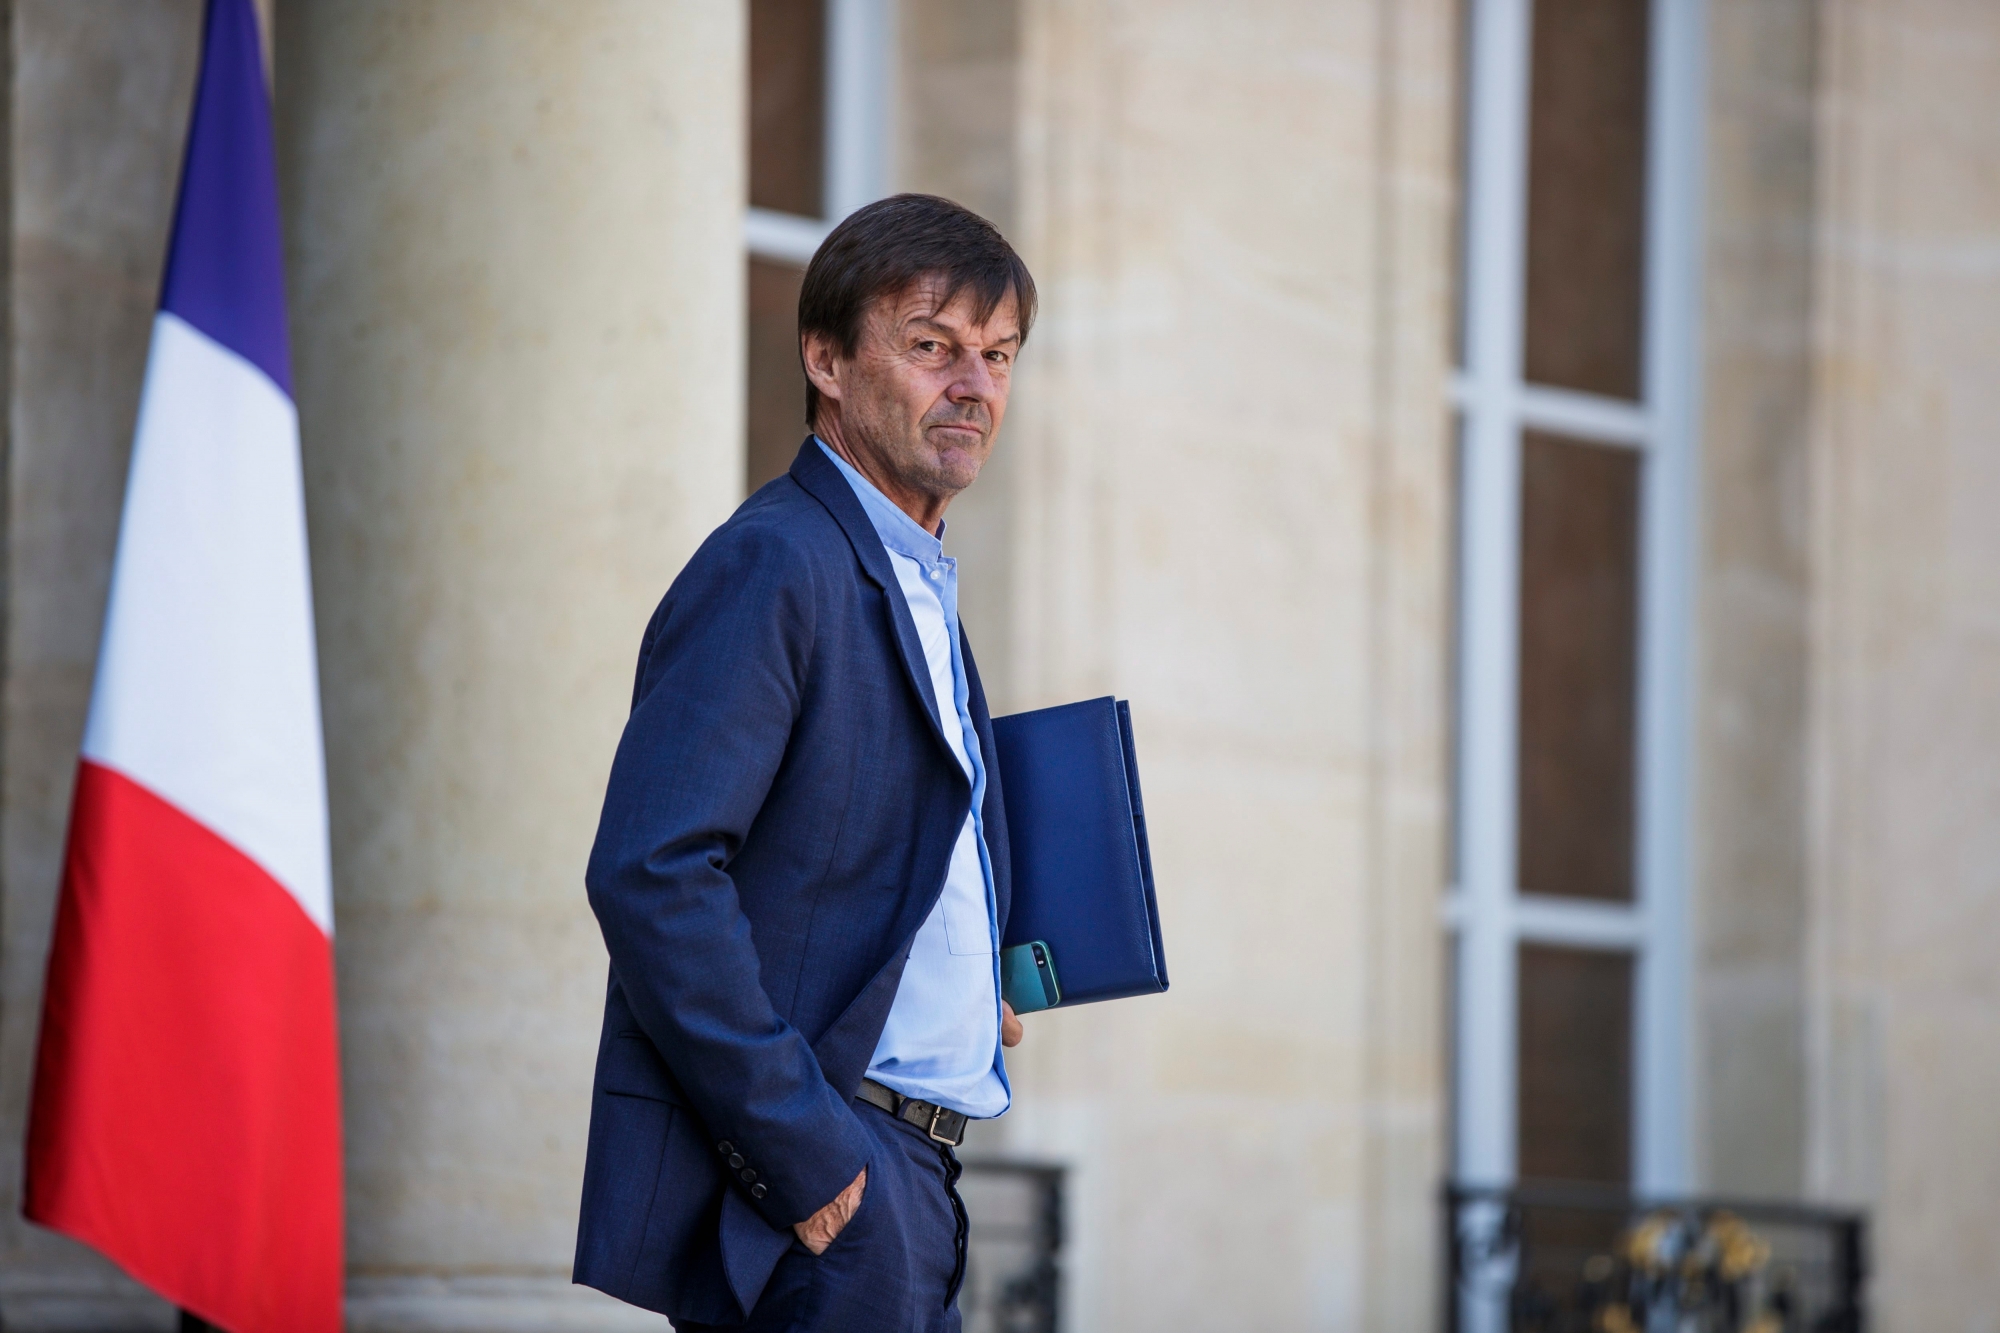 epa06978103 (FILE) - French Minister for Ecological and Inclusive Transition Nicolas Hulot leaves the Elysee palace after the weekly cabinet meeting in Paris, France, 25 July 2018 (reissued 28 August 2018). According to reports, Hulot has resigned live on radio.  EPA/CHRISTOPHE PETIT TESSON (FILE) FRANCE ENVIRONMENT MINISTER RESIGNATION